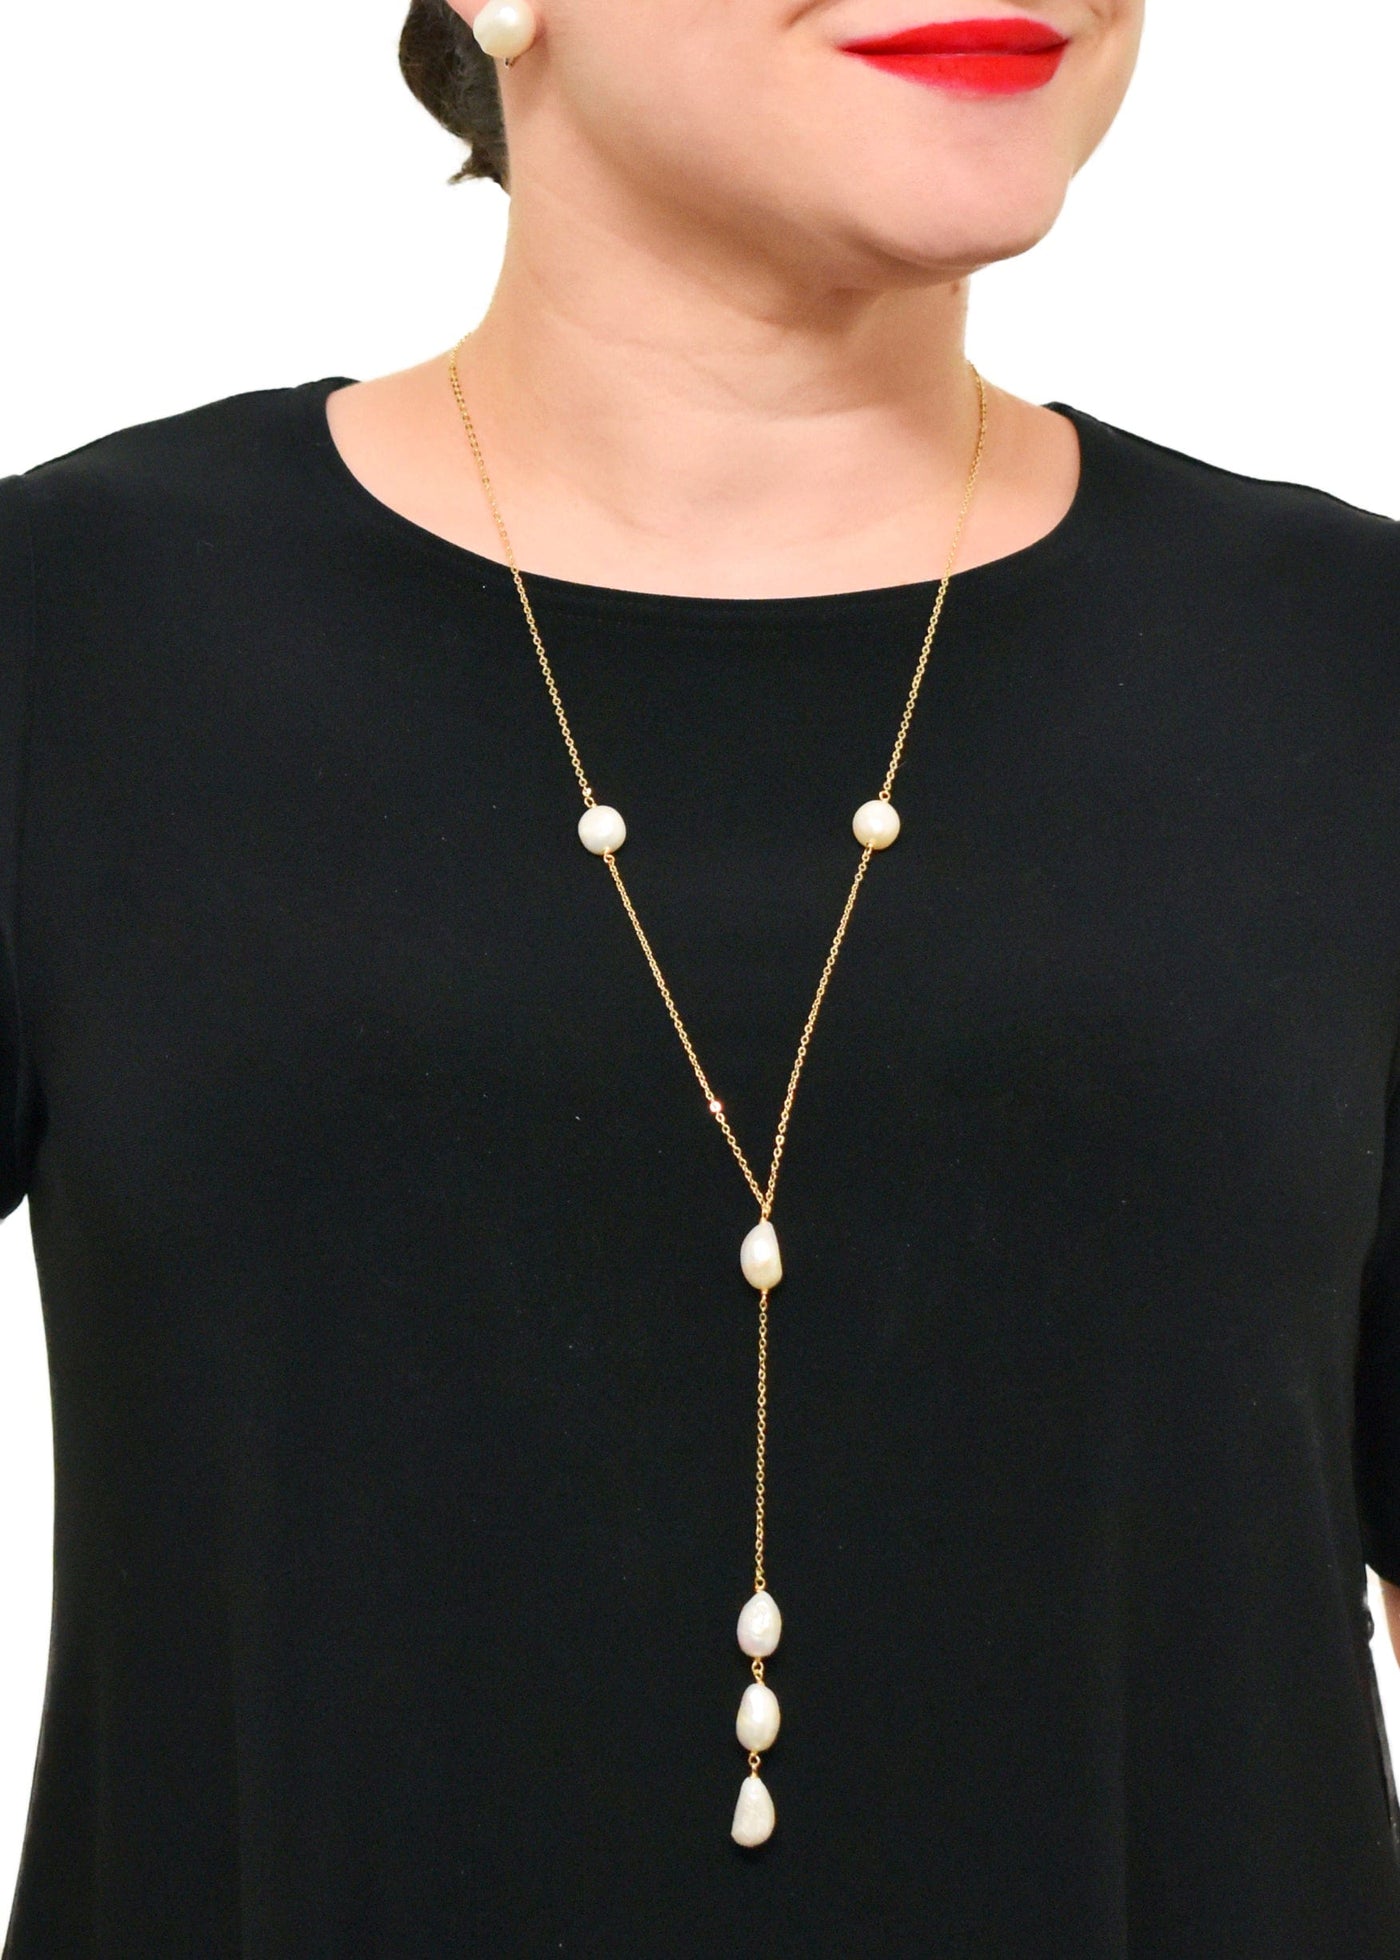 Wanted - Yvette Necklace